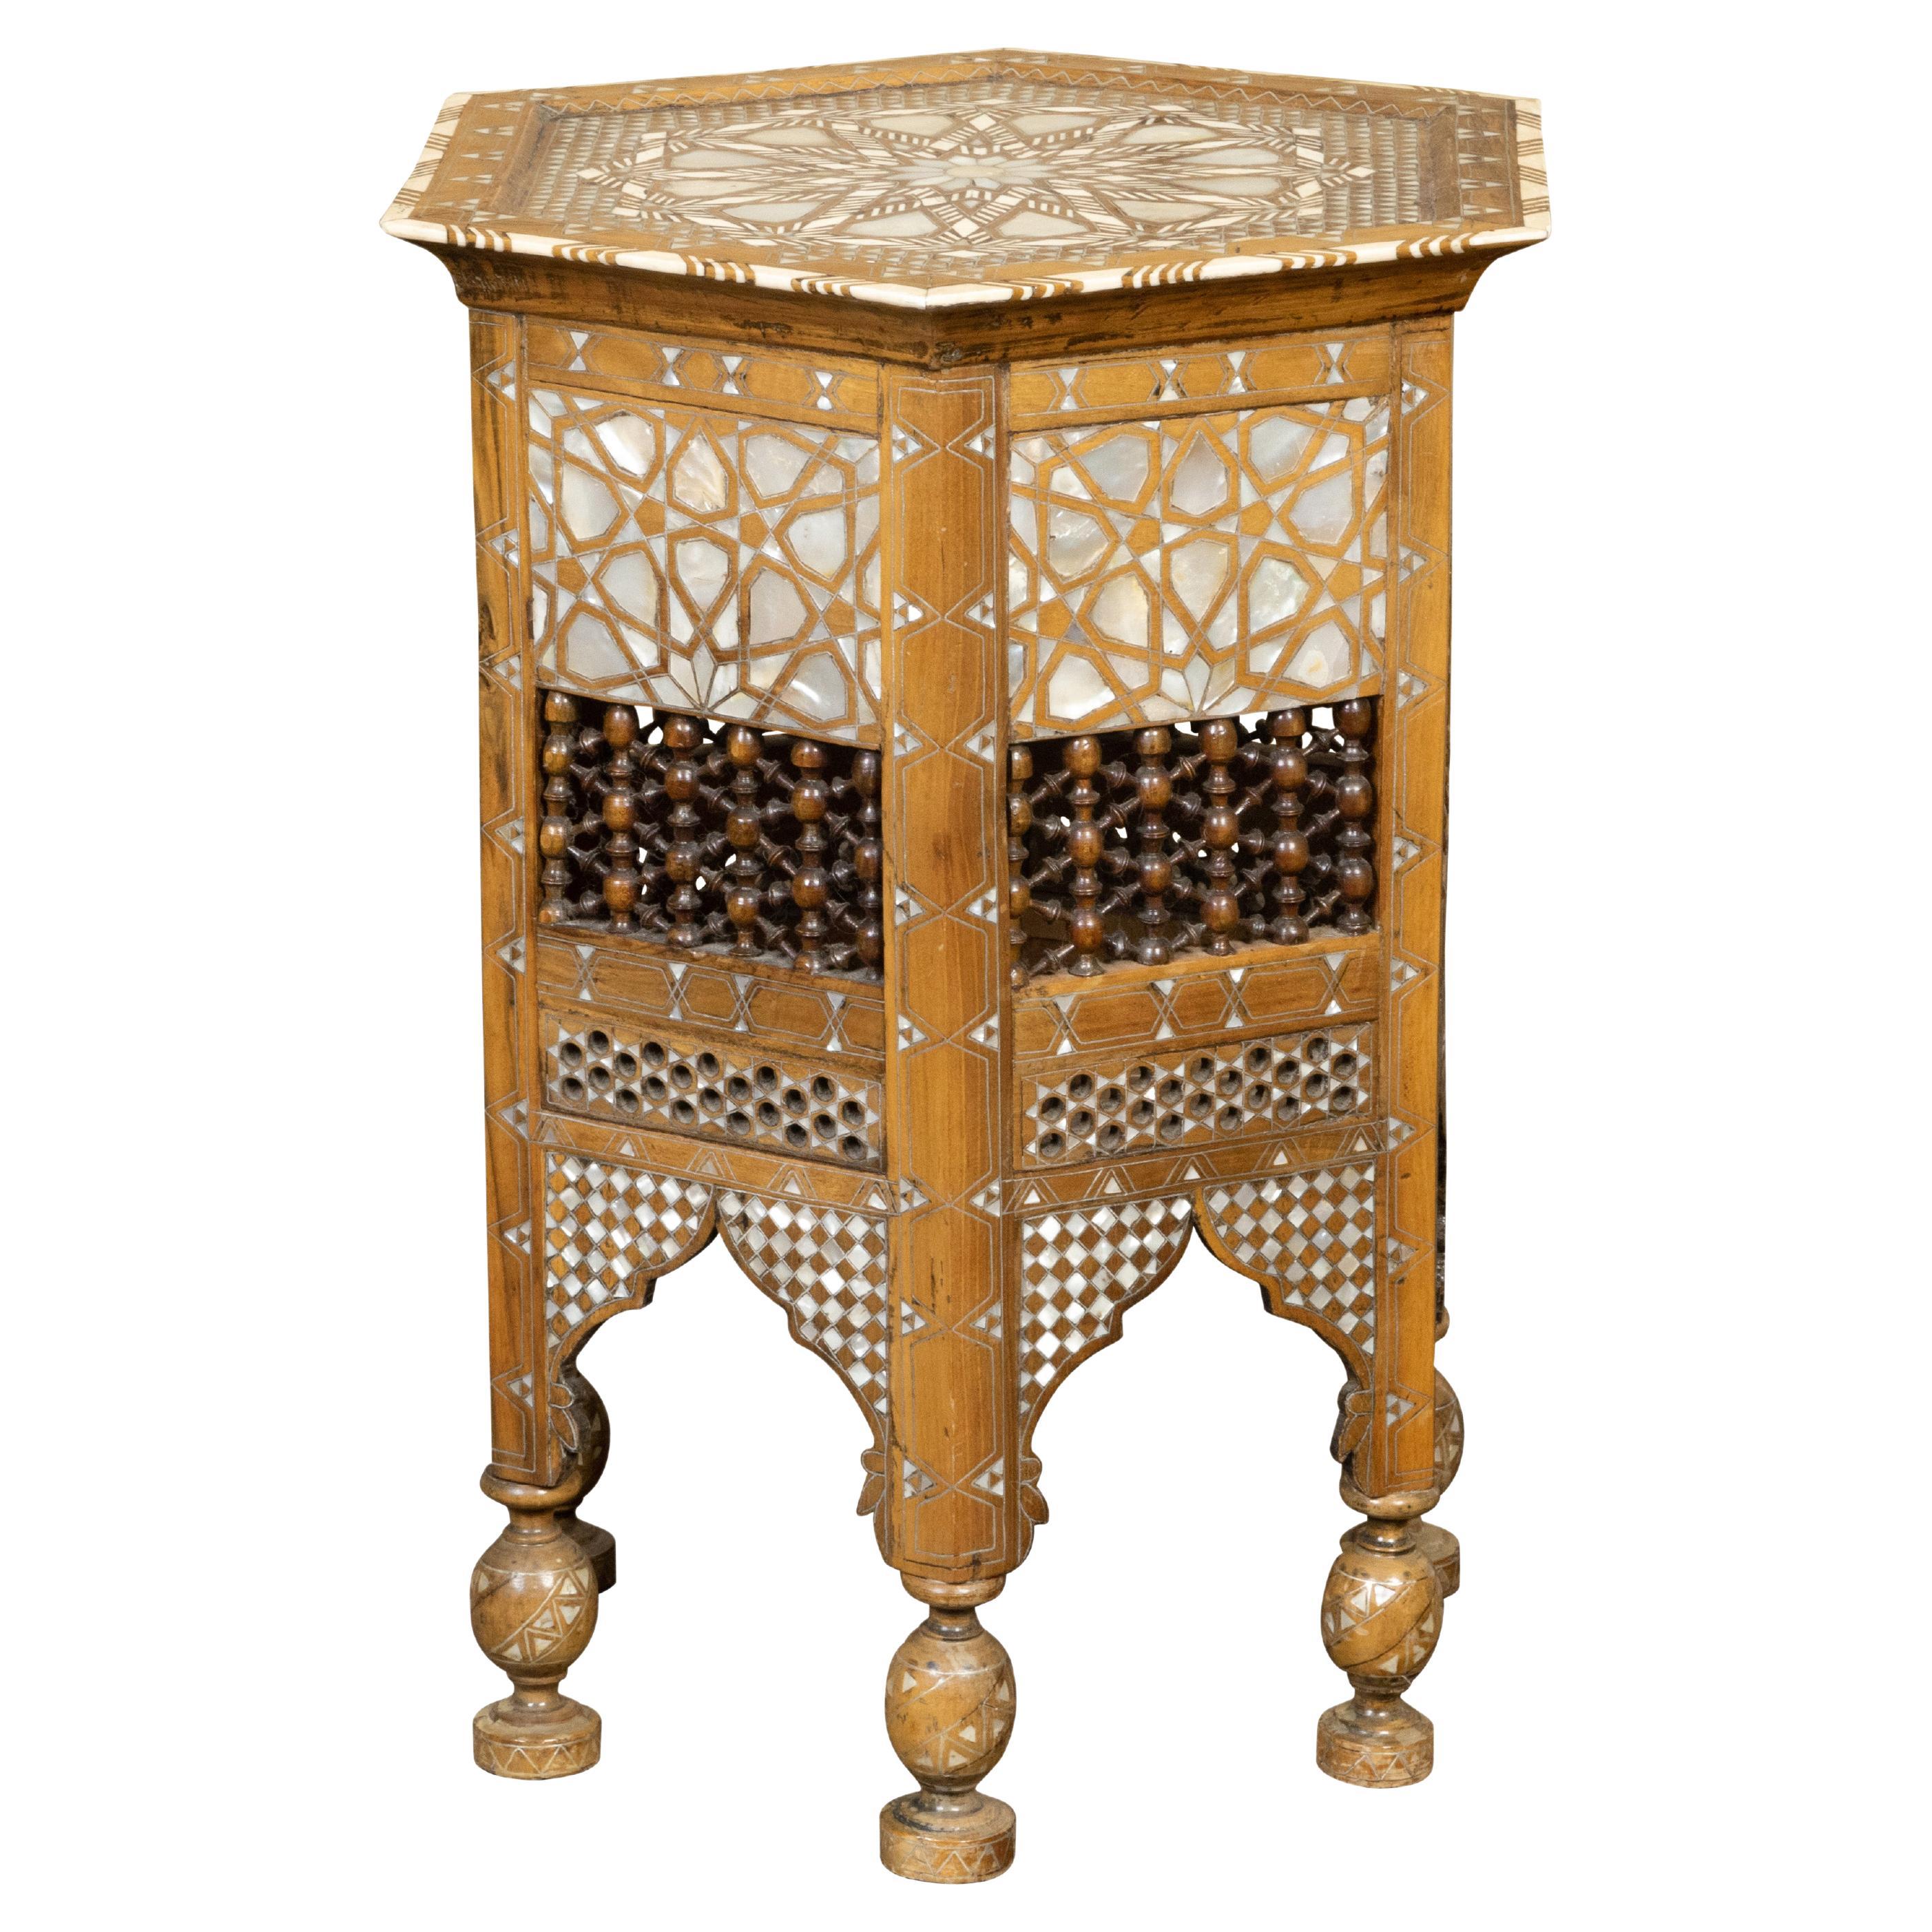 Moroccan Moorish Style 1920s Table with Hexagonal Top and Mother of Pearl Inlay